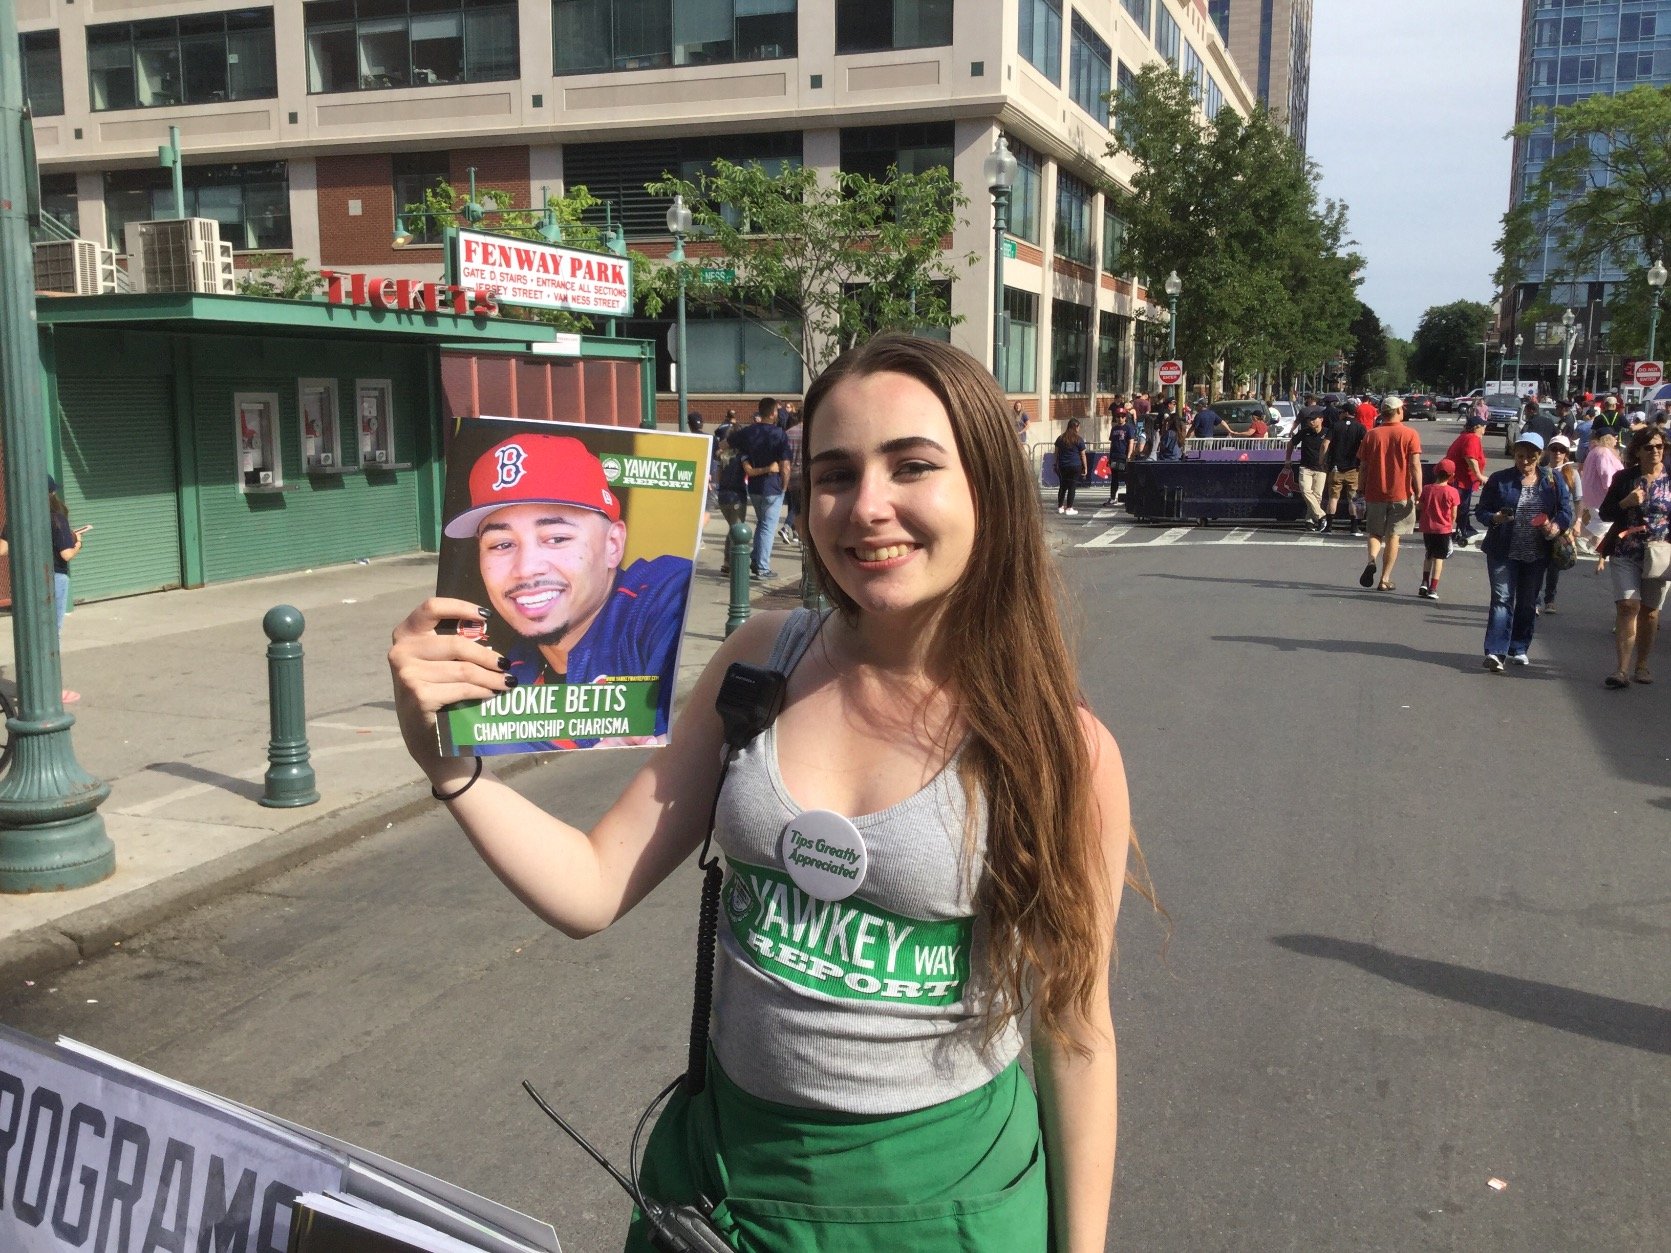 The only program sold outside #FenwayPark with OFFICIAL #MLB giveaways #RedSox Coverage  #USMC Vet Owned & Current #USArmy